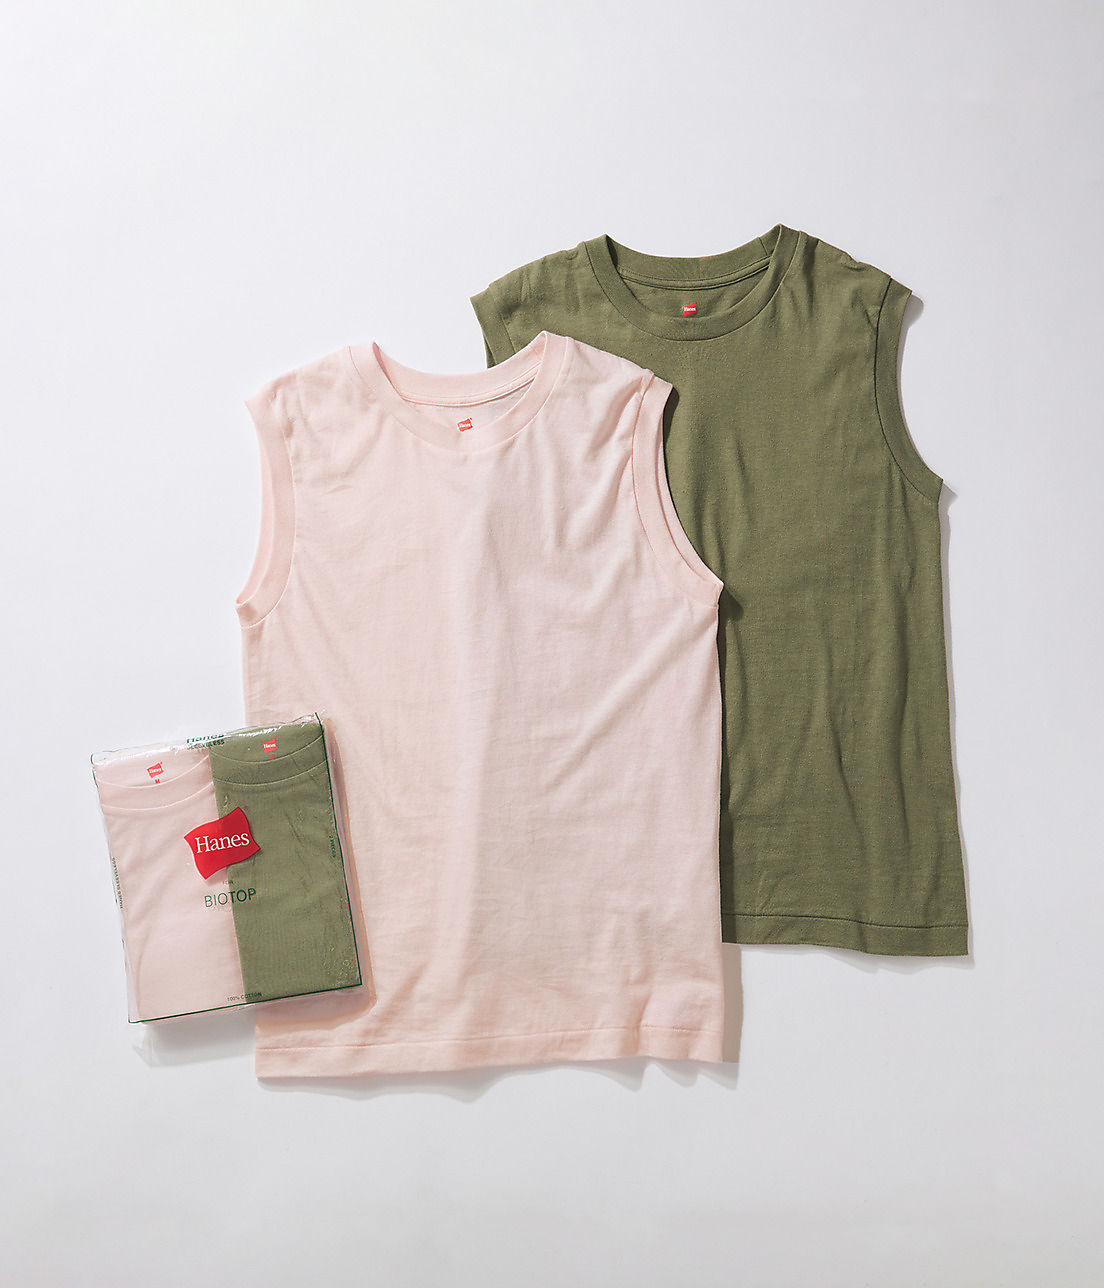 ADAM ET ROPE’【Hanes for BIOTOP】Sleeveless T-Shirts/color￥5,280　ピンク×カーキ